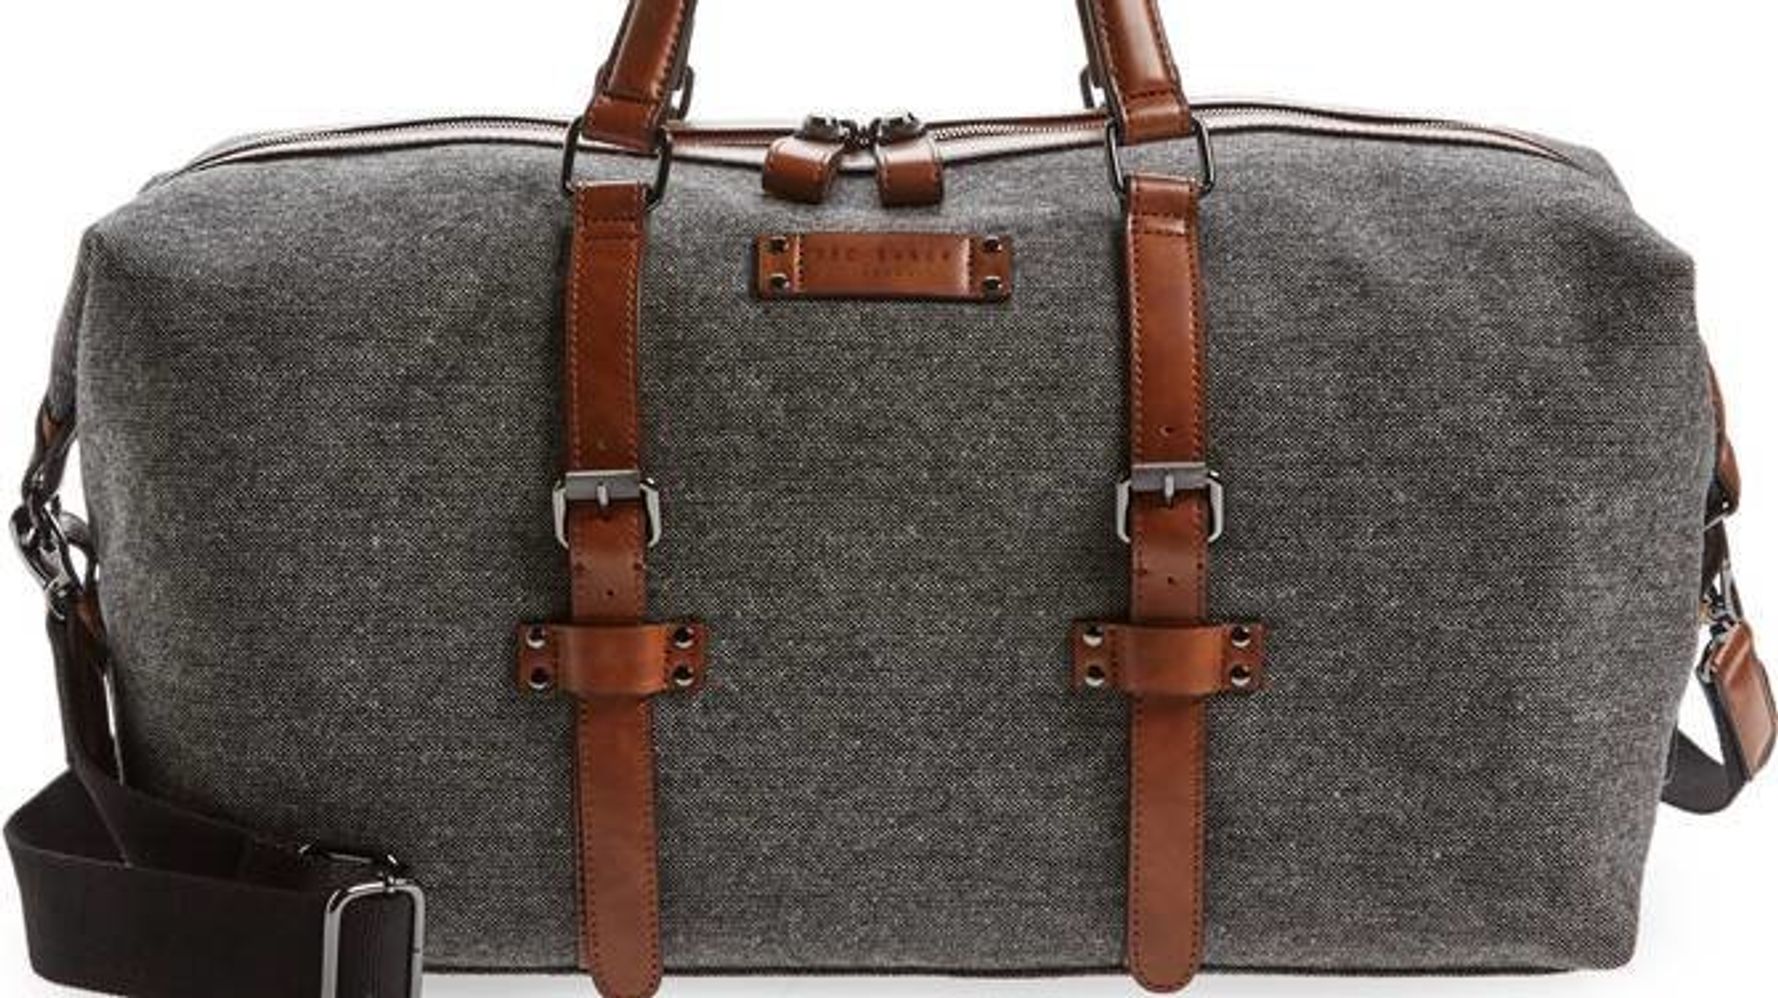 Pedigree Macadam revelation 13 Of The Best Men's Duffel Bags For Your Weekend Travels | HuffPost Life